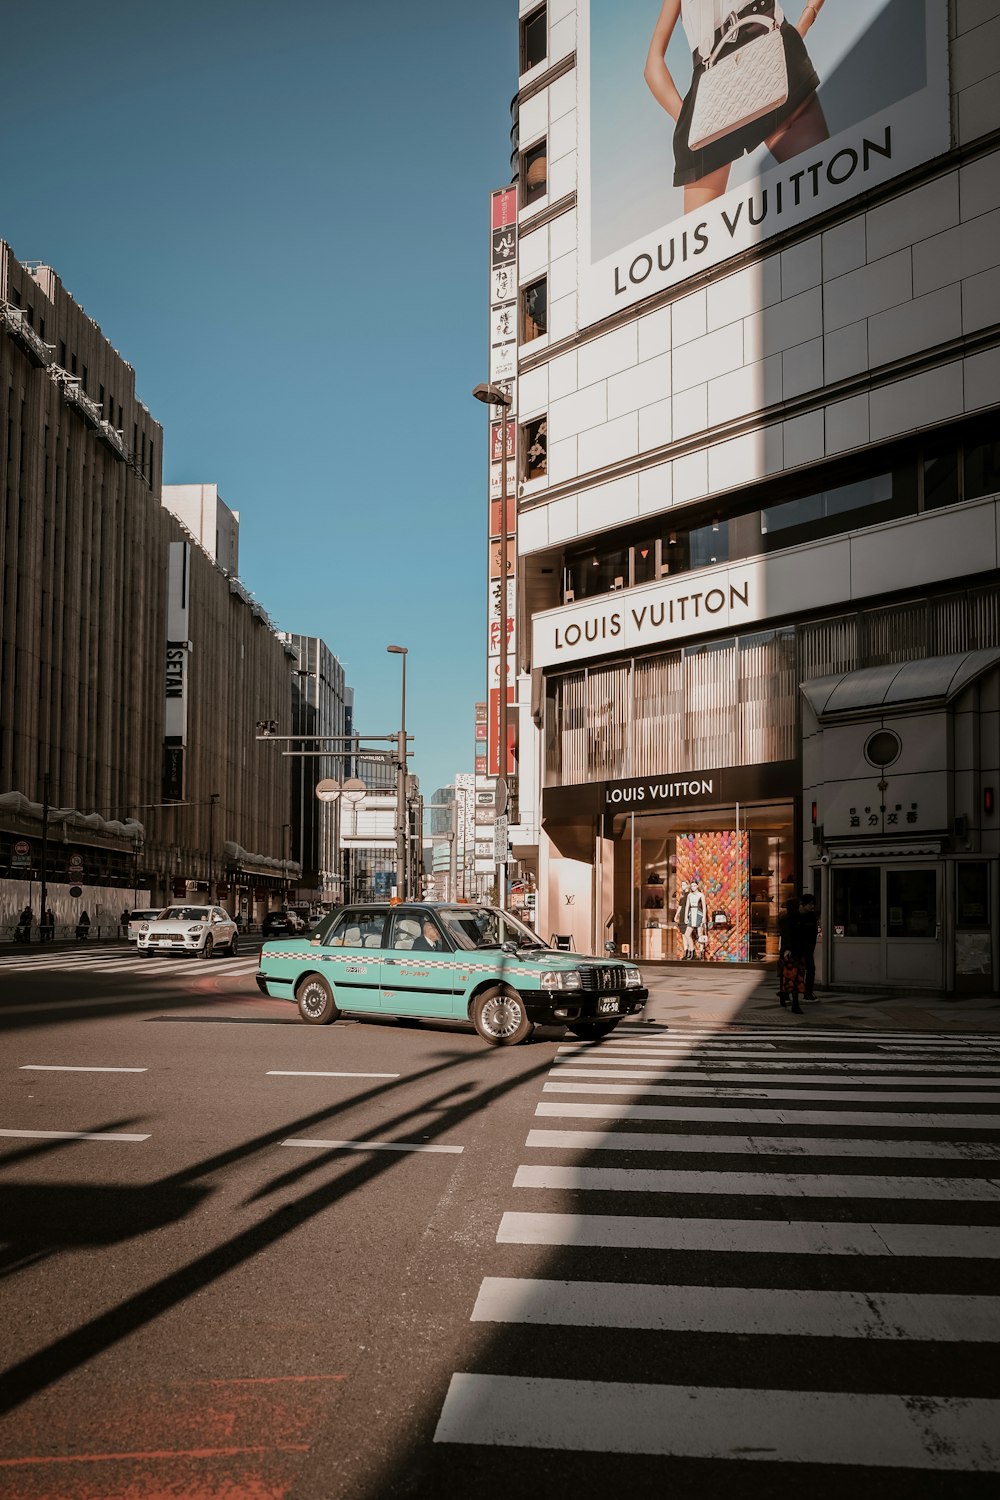 A blue car driving down a street next to tall buildings photo – Free Japan  Image on Unsplash